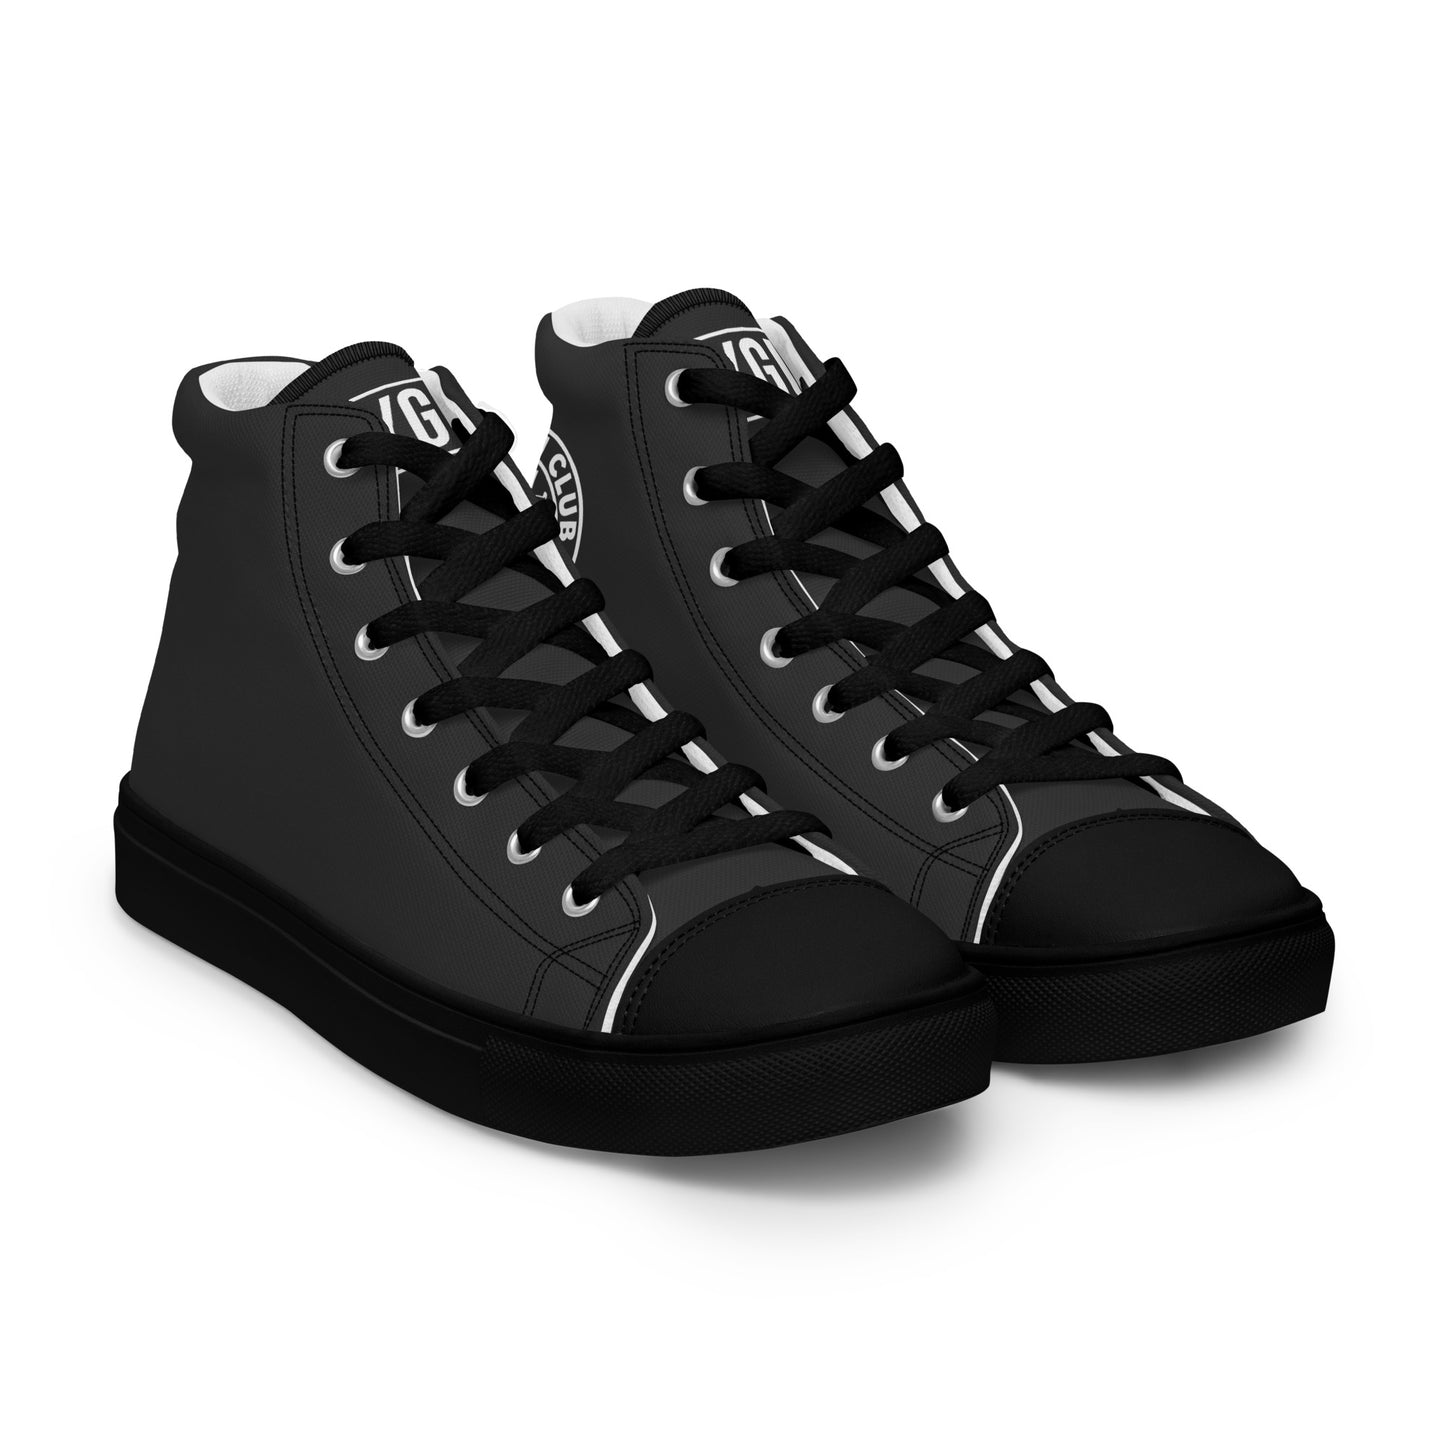 Men’s RAYGUN high top canvas shoes